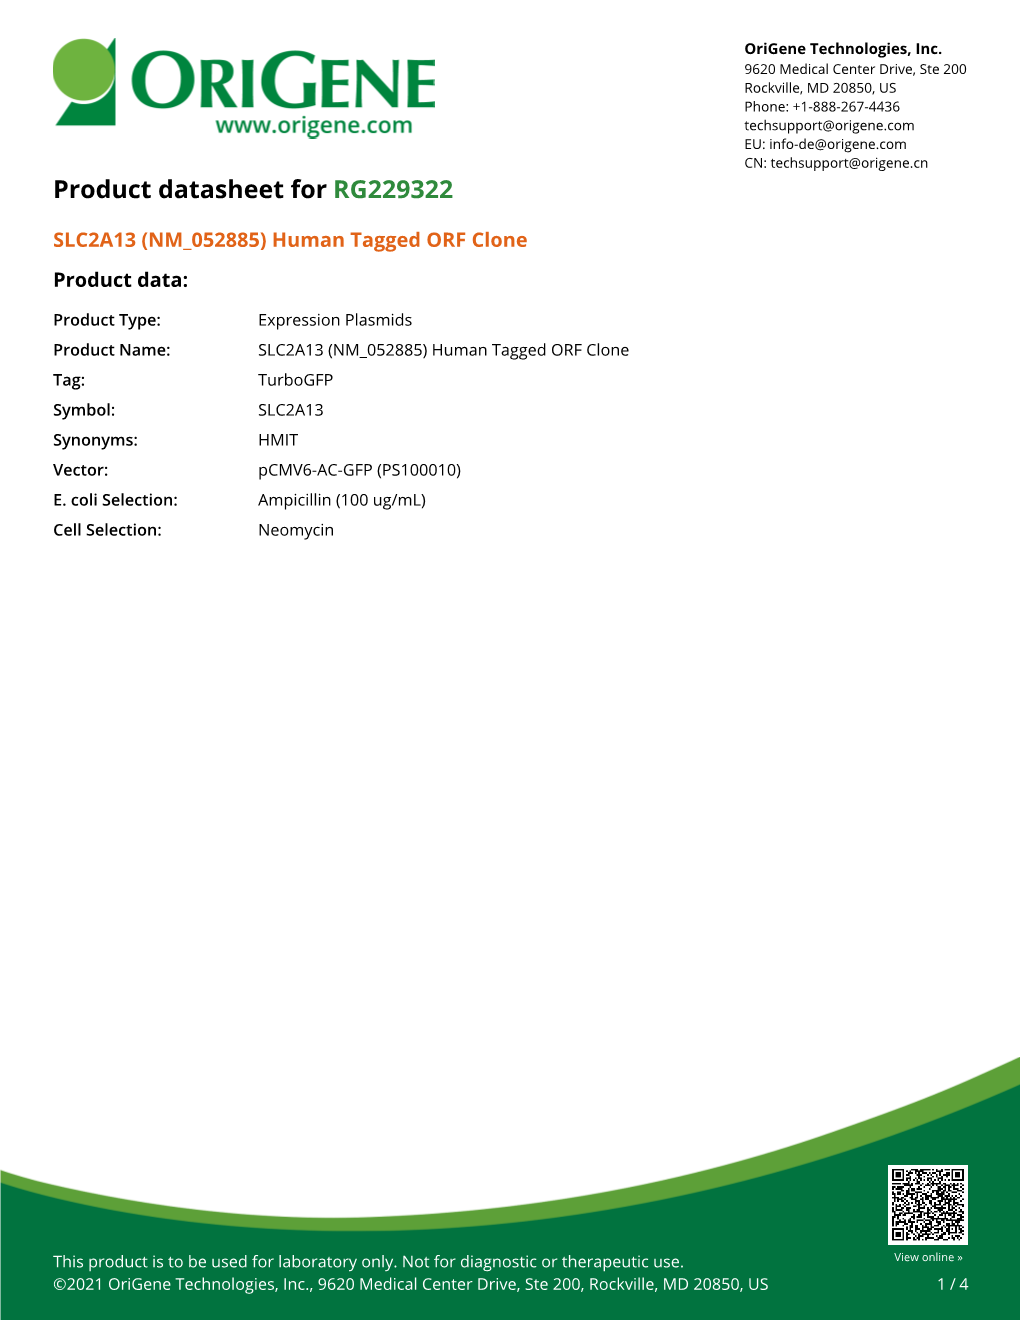 SLC2A13 (NM 052885) Human Tagged ORF Clone Product Data